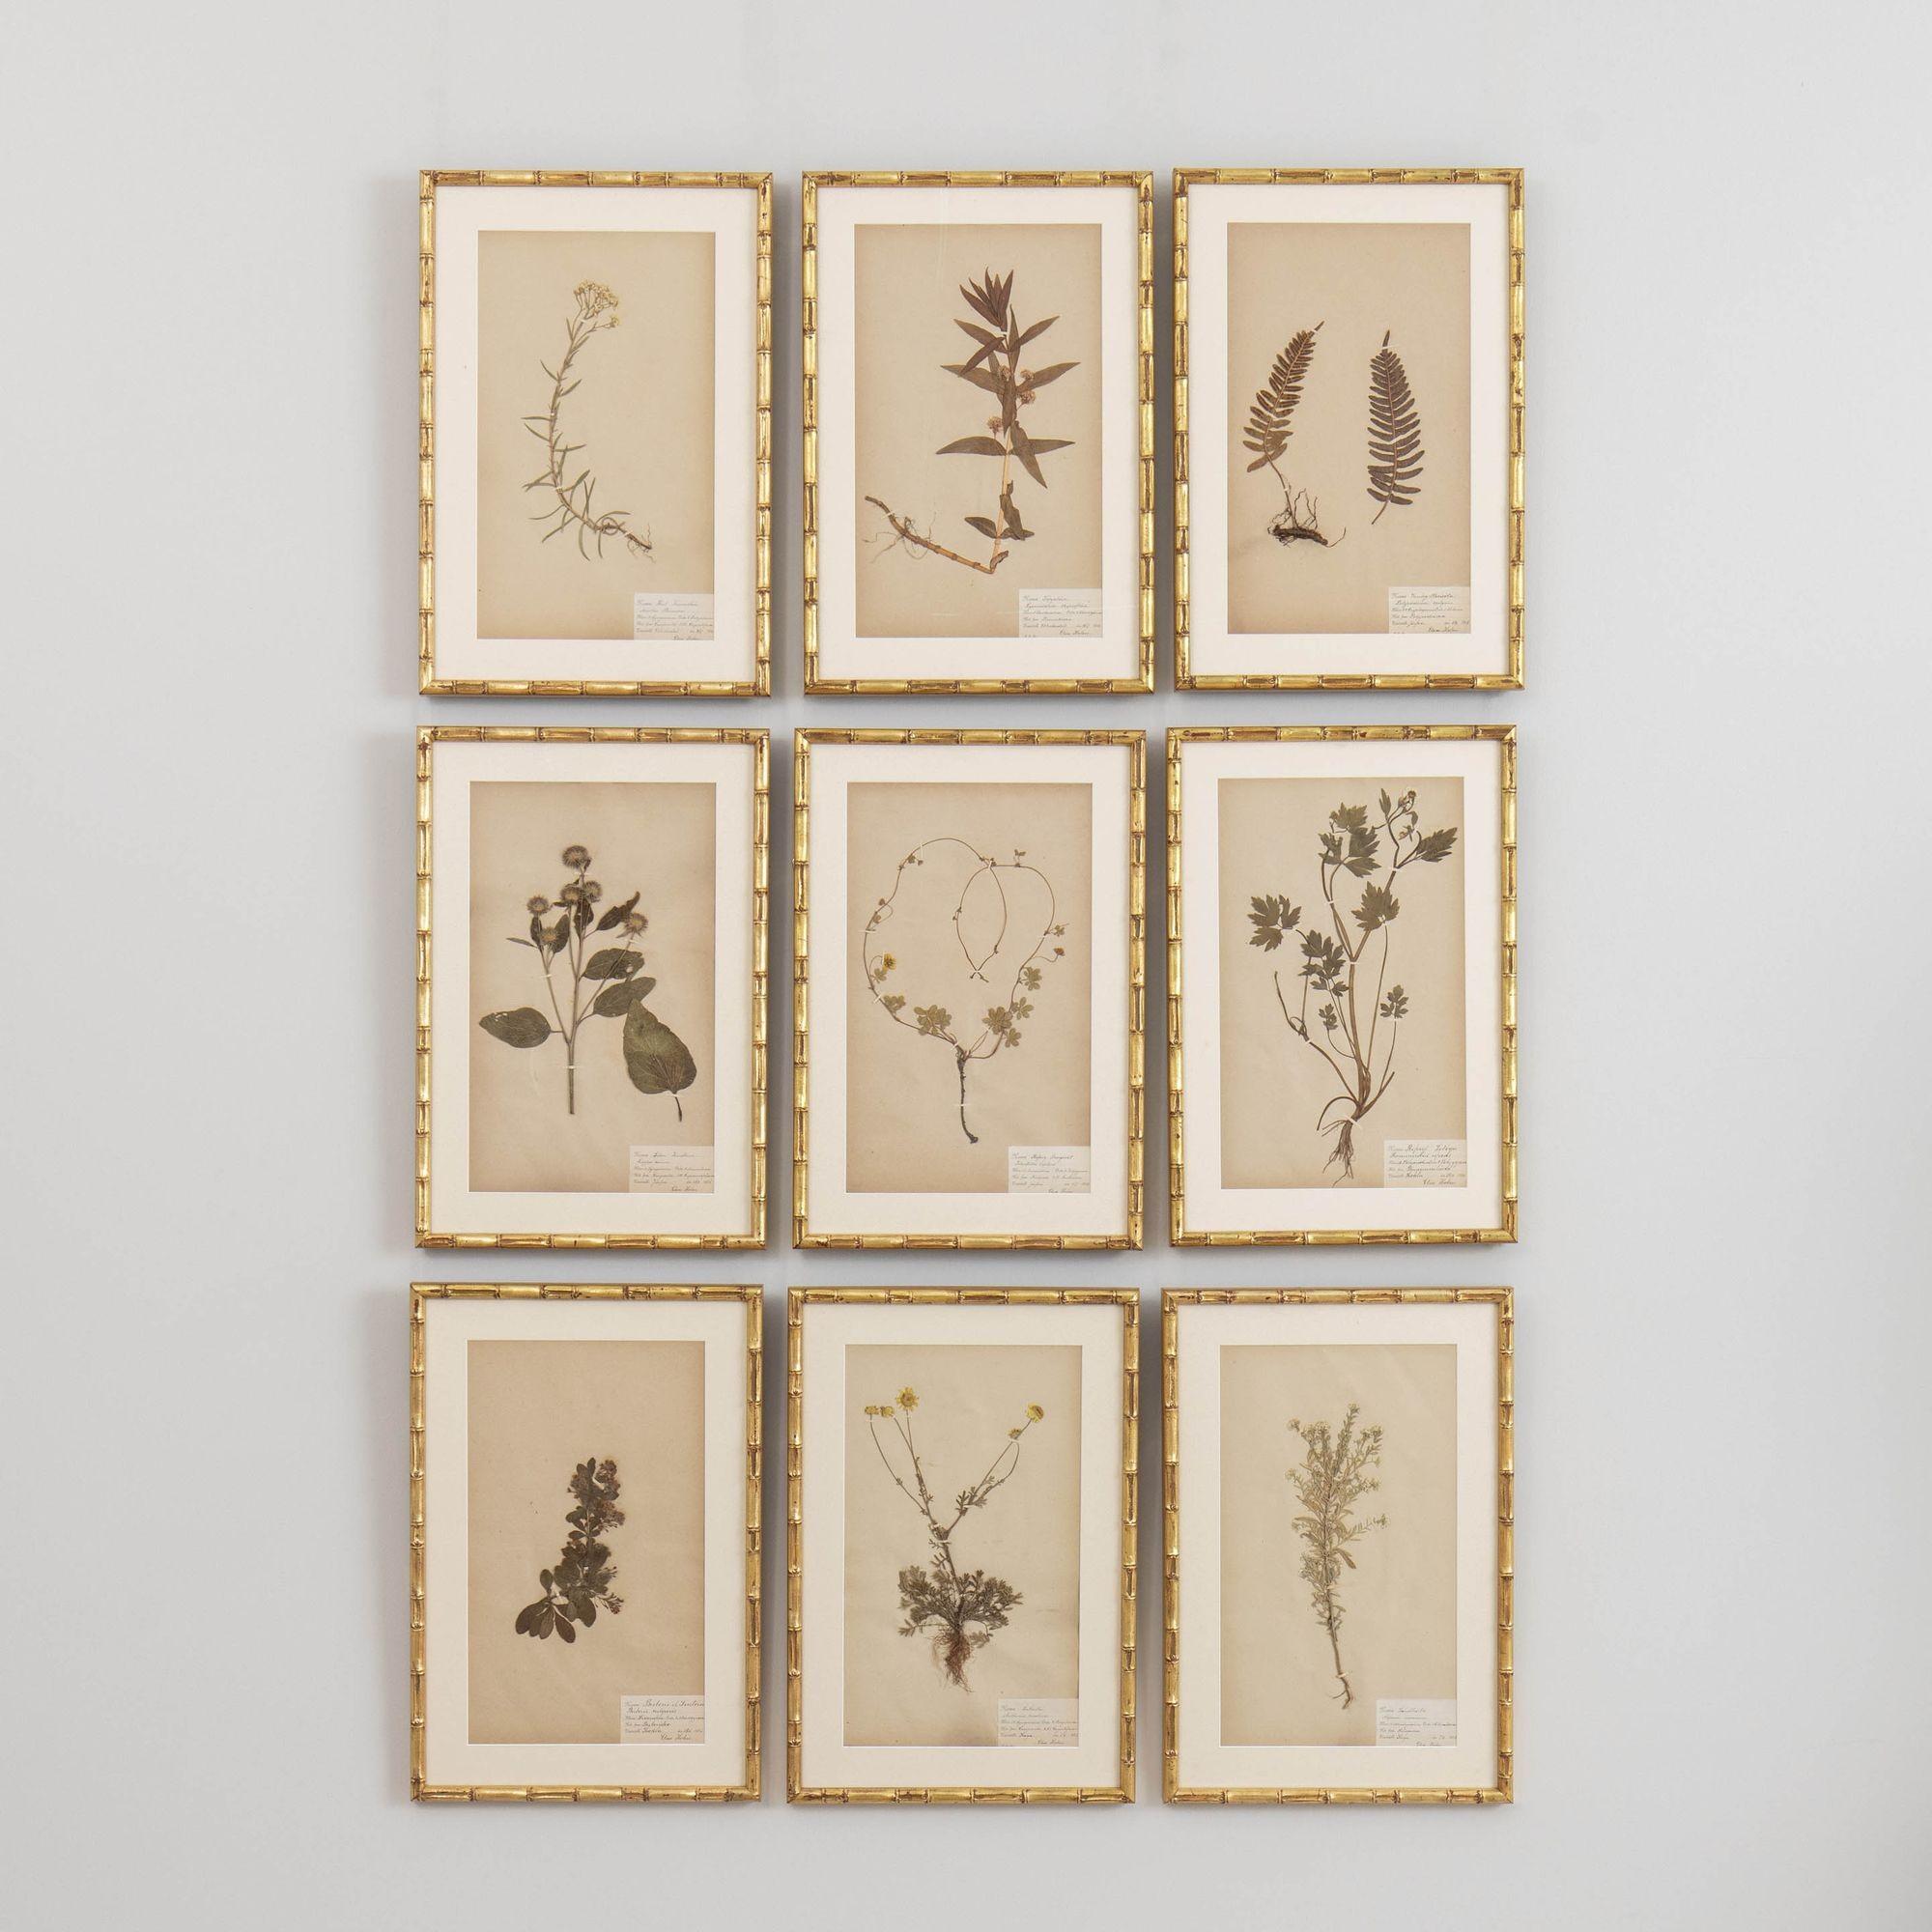 Hand-Crafted 19th c. Collection of 9 Framed Large Swedish Herbarium Studies